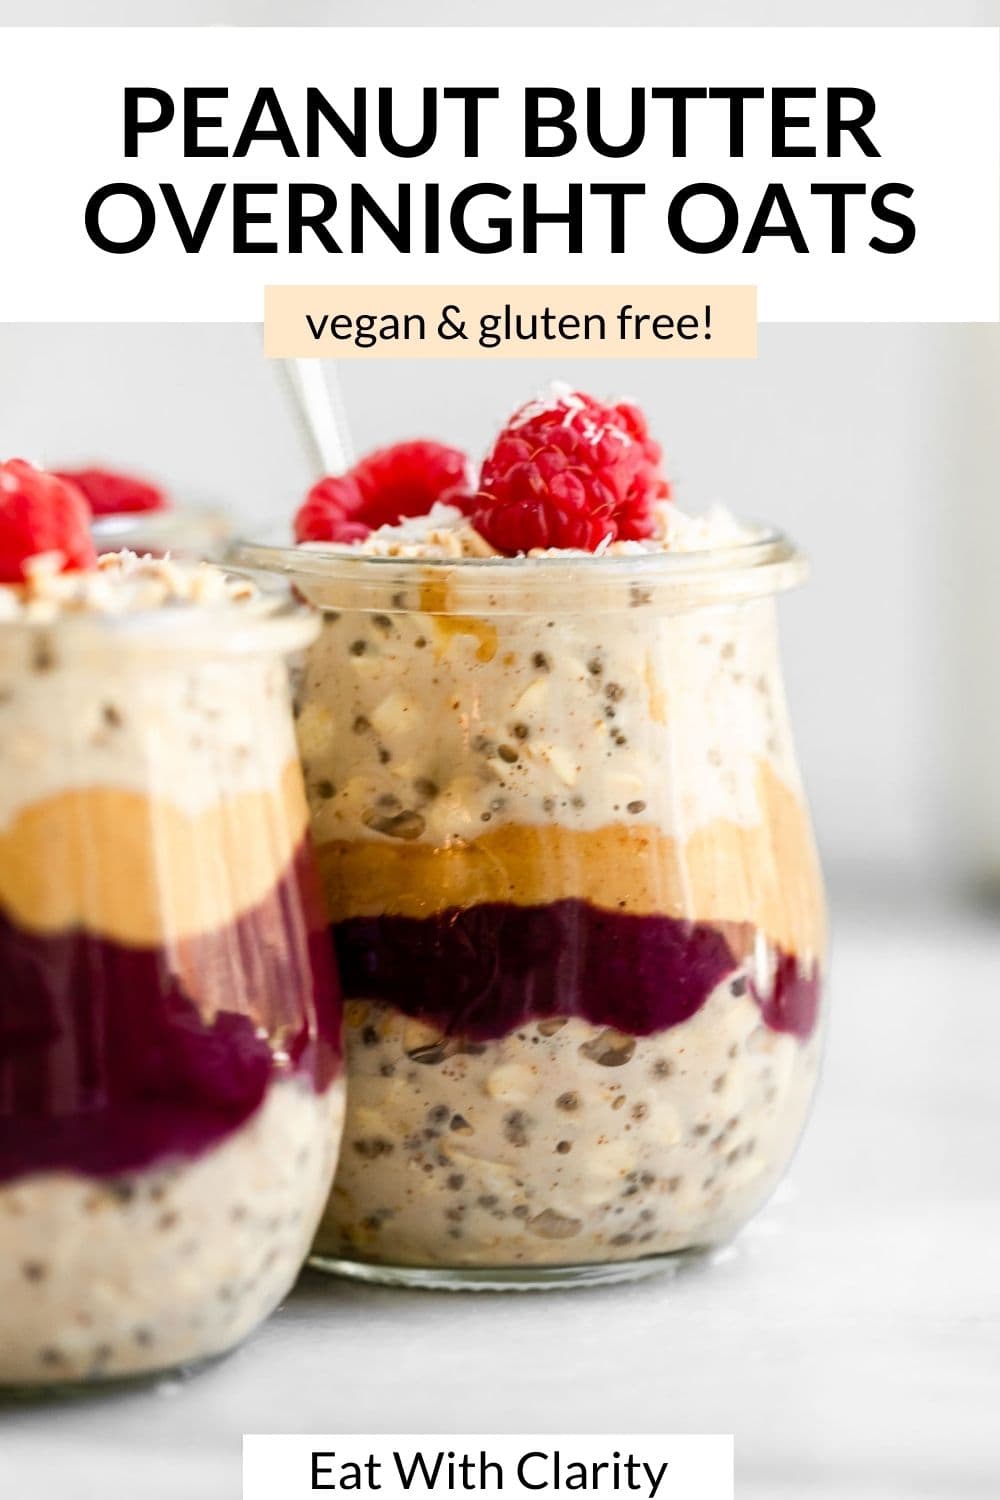 Peanut Butter & Jelly Overnight Oats | Eat With Clarity